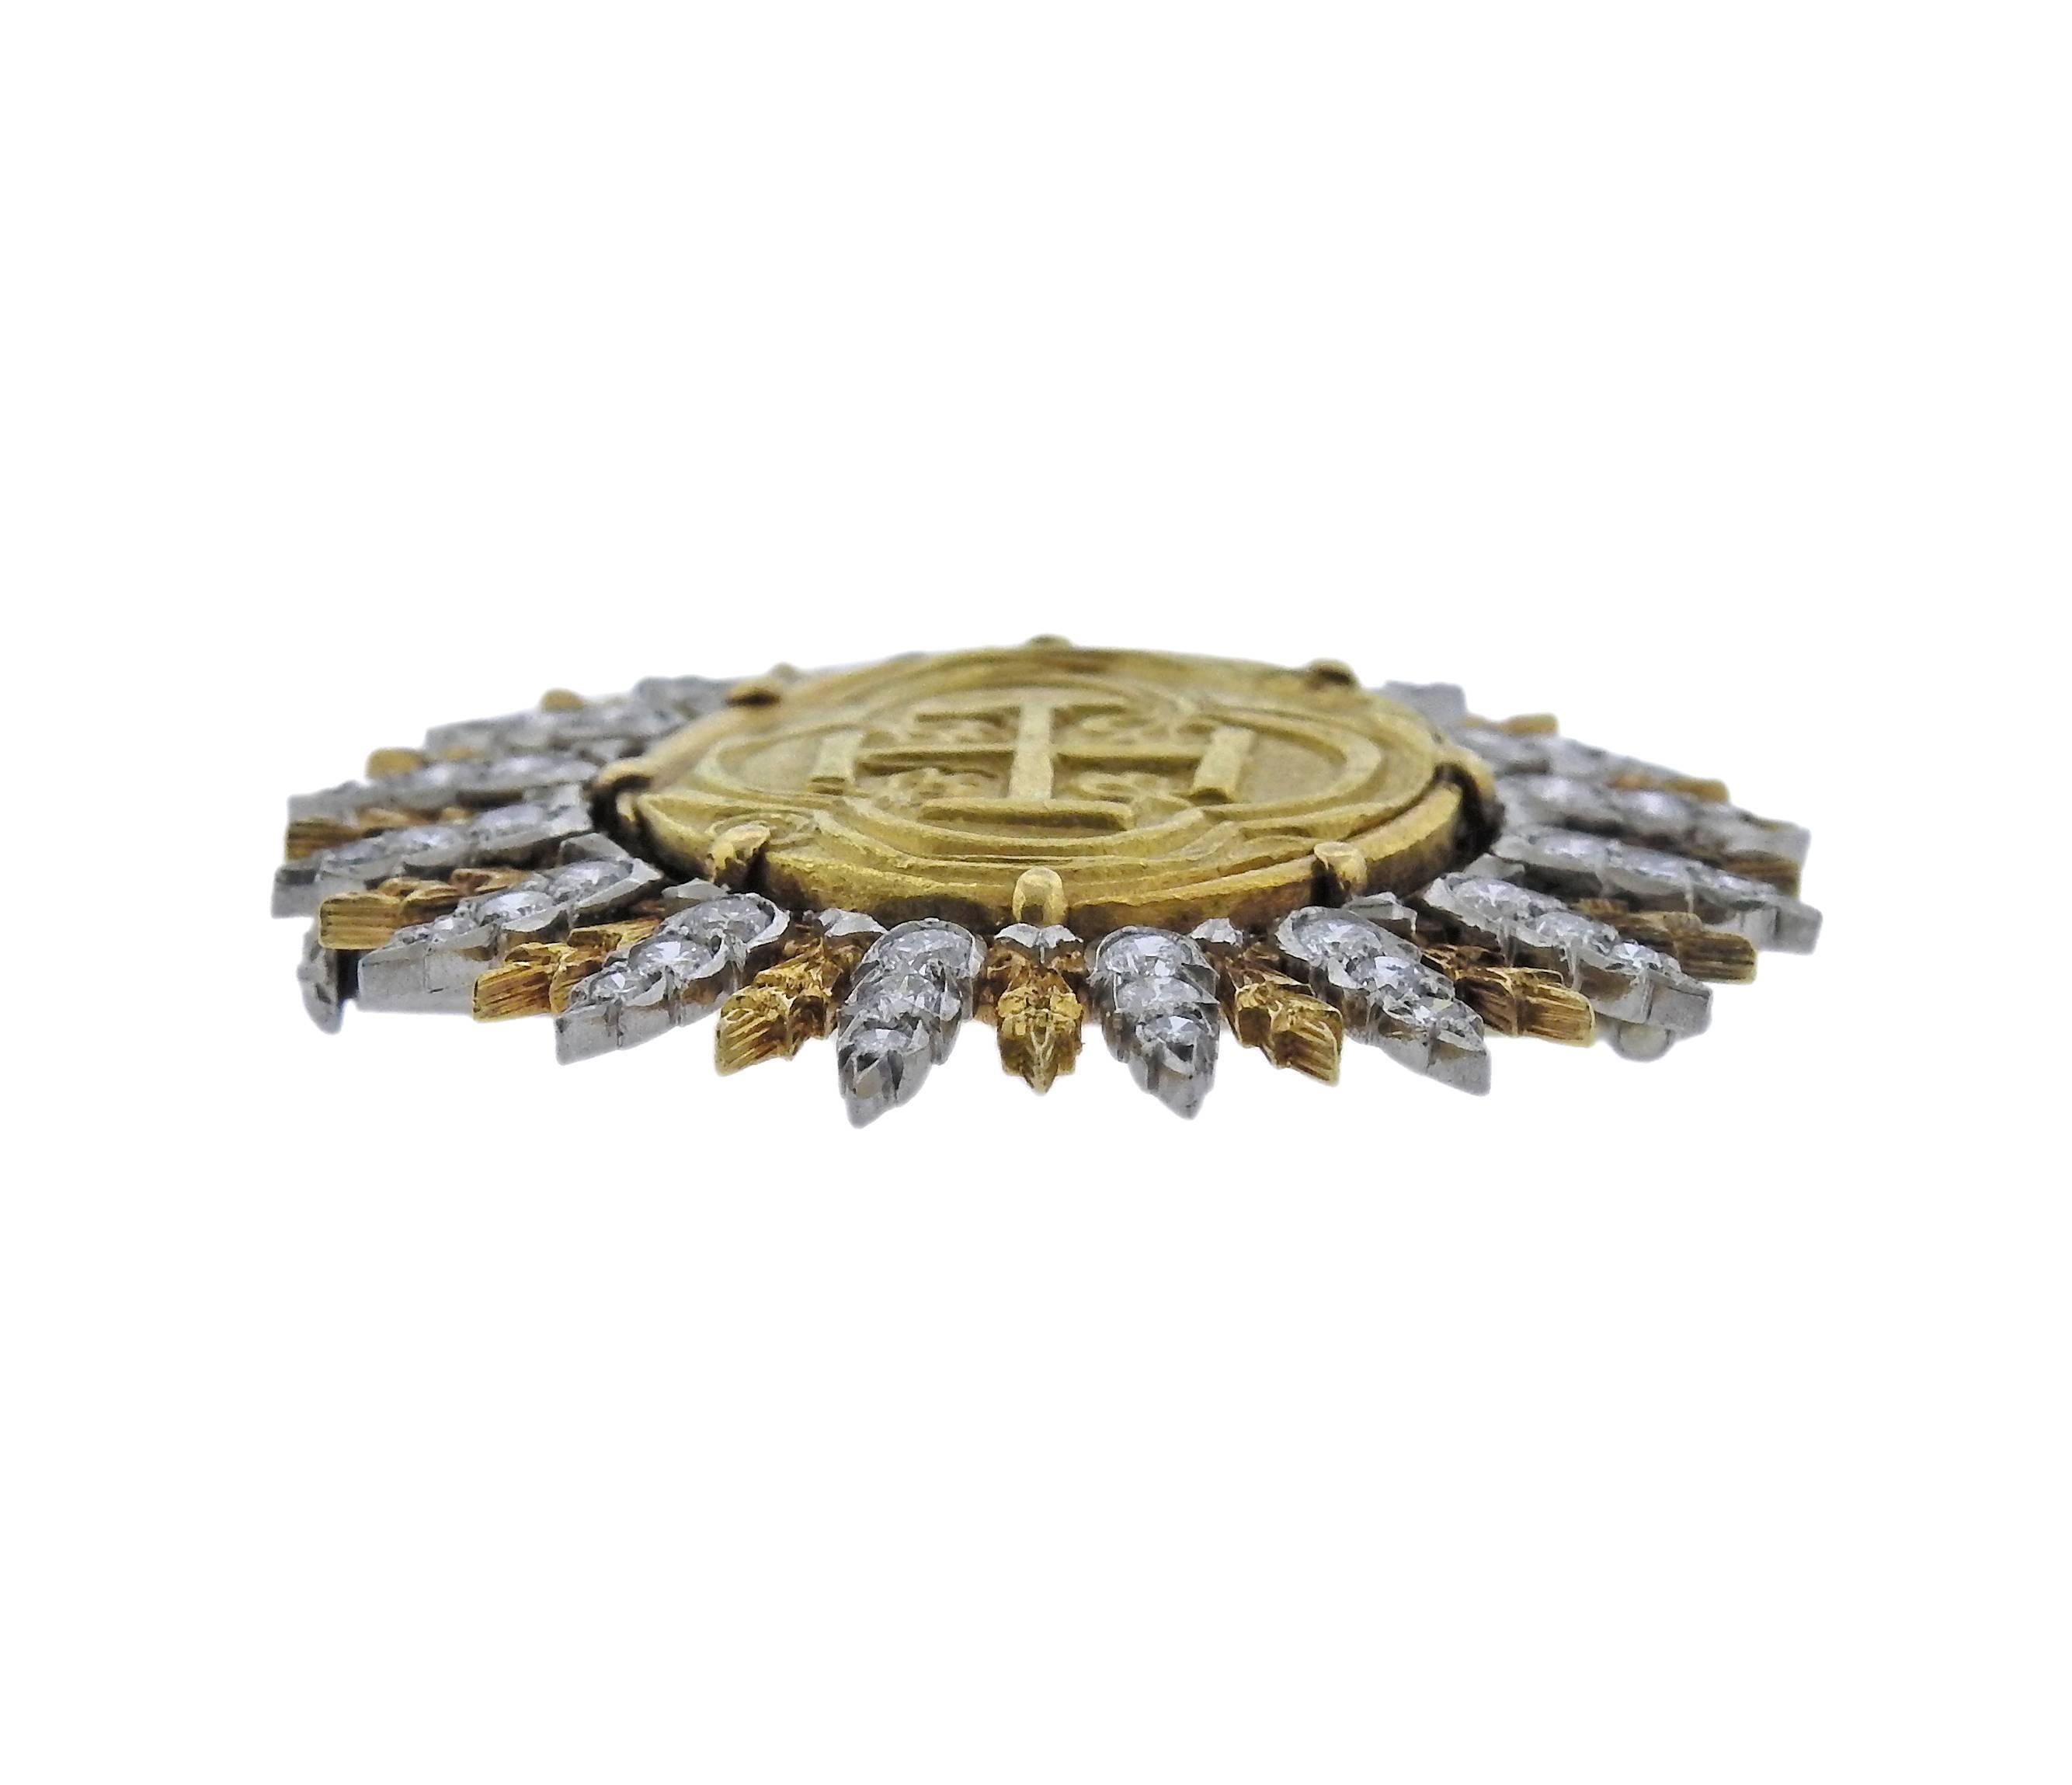 Impressive 18k gold Buccellati brooch, decorated with ancient Byzantine empire coin, surrounded with approx. 1.00ctw in diamonds.  Brooch is 36mm in diameter , weighs 17.3 grams. Marked: Buccellati.